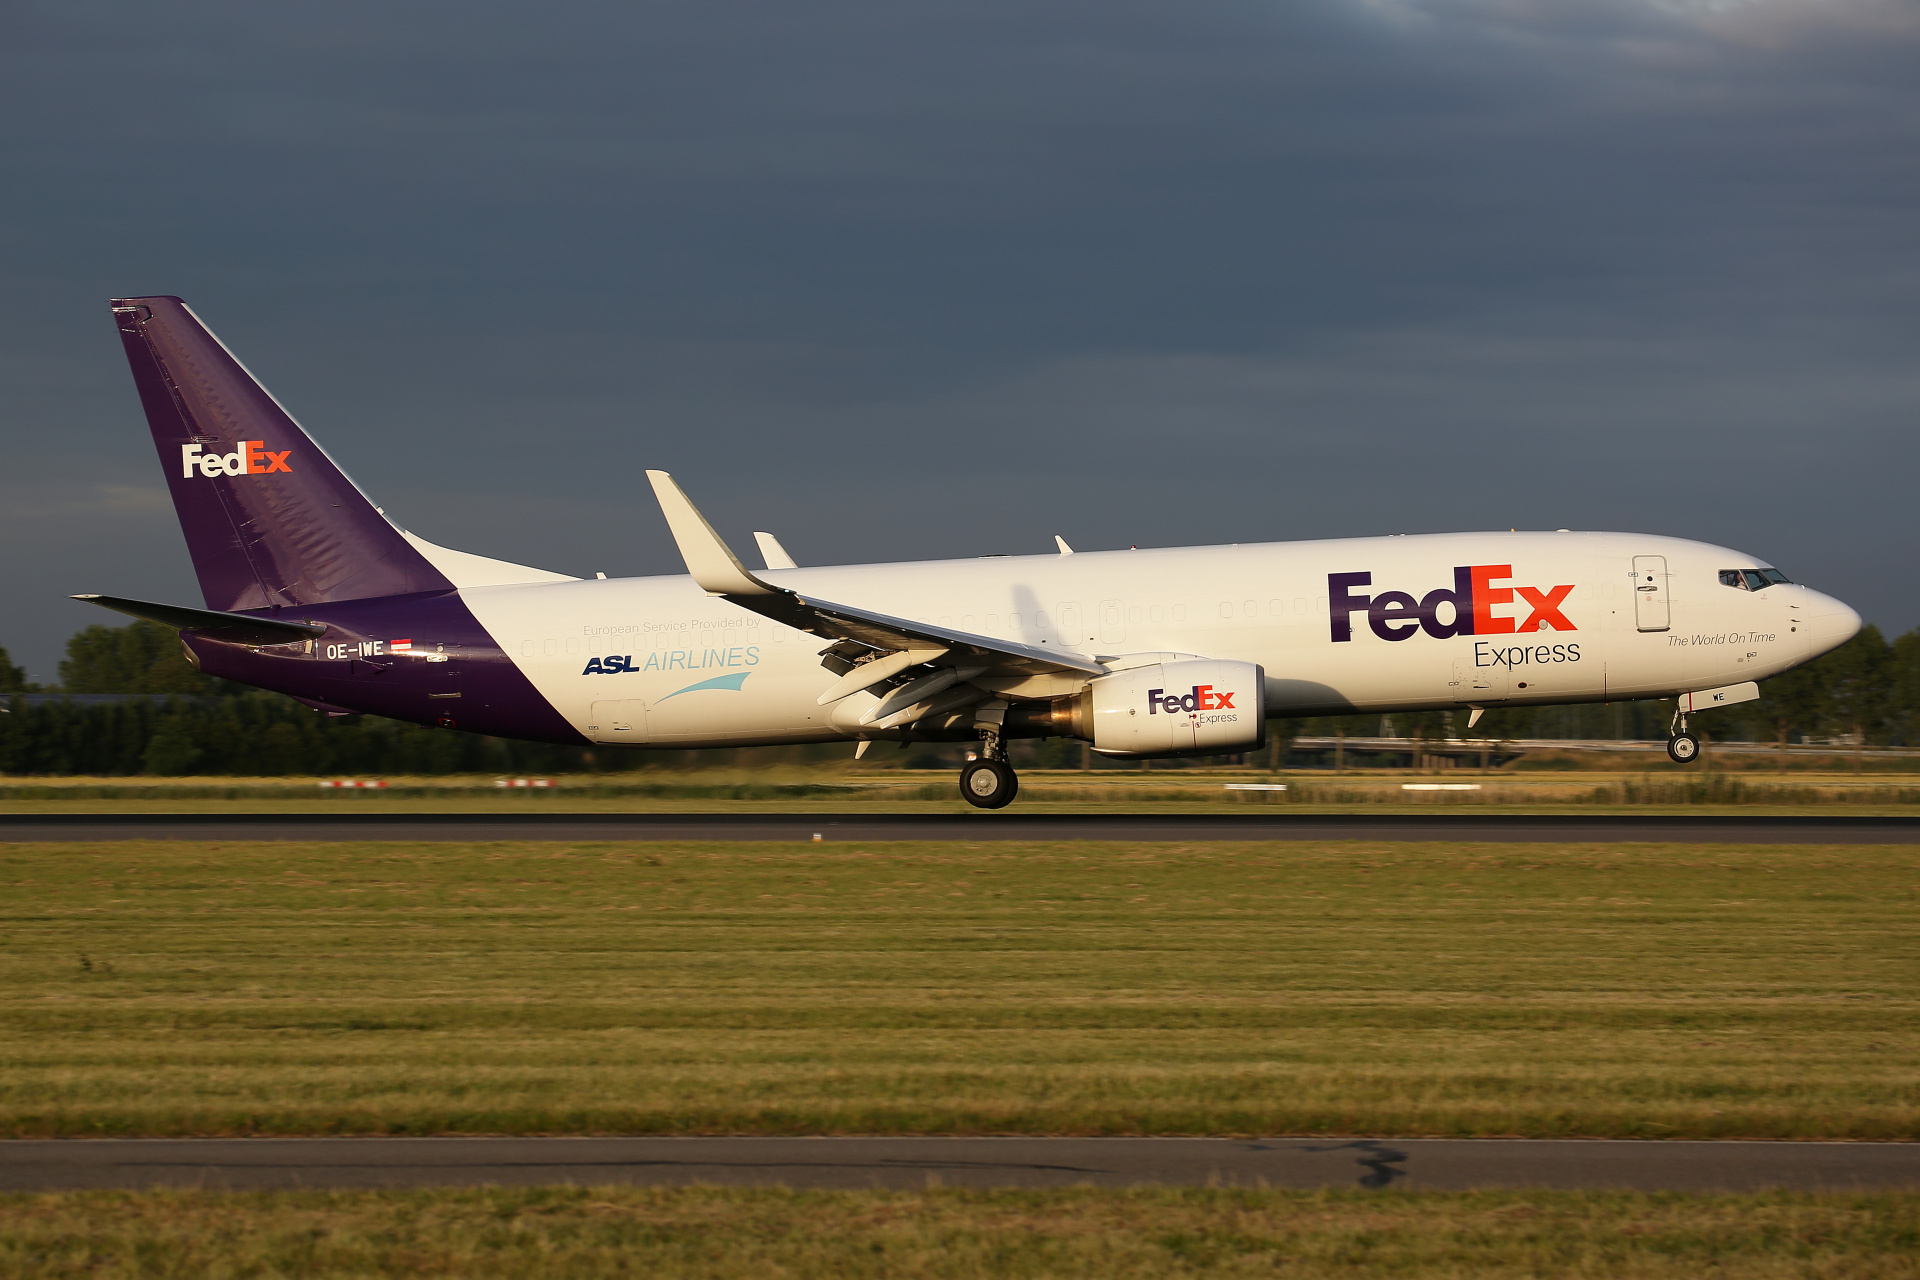 Boeing 737-800BCF, OE-IWE, FedEx Express (ASL Airlines) (Aircraft » Schiphol Spotting » various)